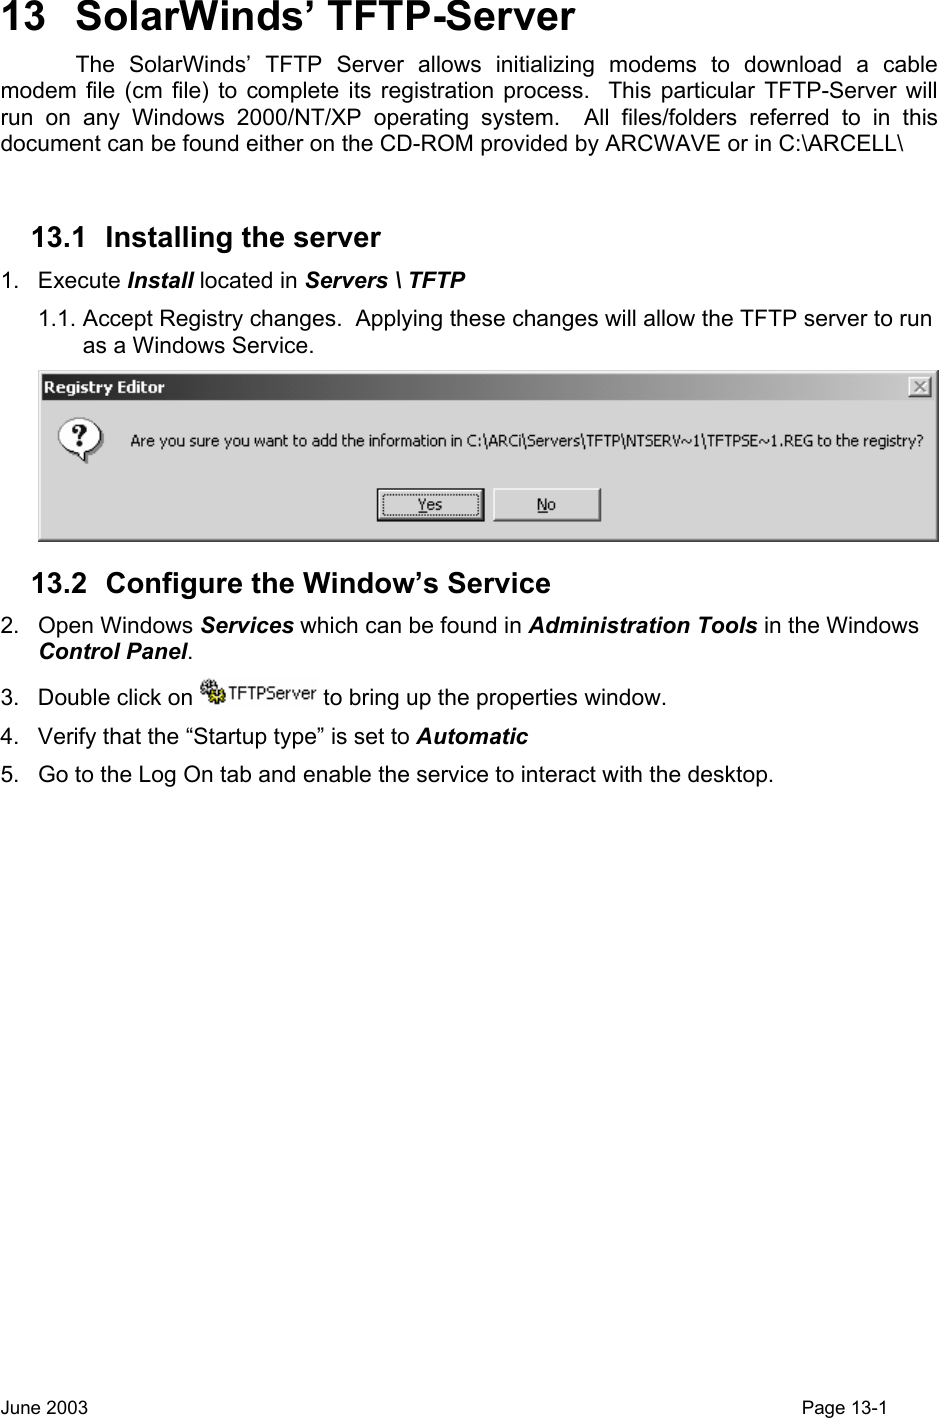  13 SolarWinds’ TFTP-Server   The SolarWinds’ TFTP Server allows initializing modems to download a cable modem file (cm file) to complete its registration process.  This particular TFTP-Server will run on any Windows 2000/NT/XP operating system.  All files/folders referred to in this document can be found either on the CD-ROM provided by ARCWAVE or in C:\ARCELL\  13.1  Installing the server 1. Execute Install located in Servers \ TFTP 1.1. Accept Registry changes.  Applying these changes will allow the TFTP server to run as a Windows Service.  13.2  Configure the Window’s Service 2. Open Windows Services which can be found in Administration Tools in the Windows Control Panel. 3.  Double click on   to bring up the properties window. 4.  Verify that the “Startup type” is set to Automatic 5.  Go to the Log On tab and enable the service to interact with the desktop. June 2003                                                                                                                                         Page 13-1  